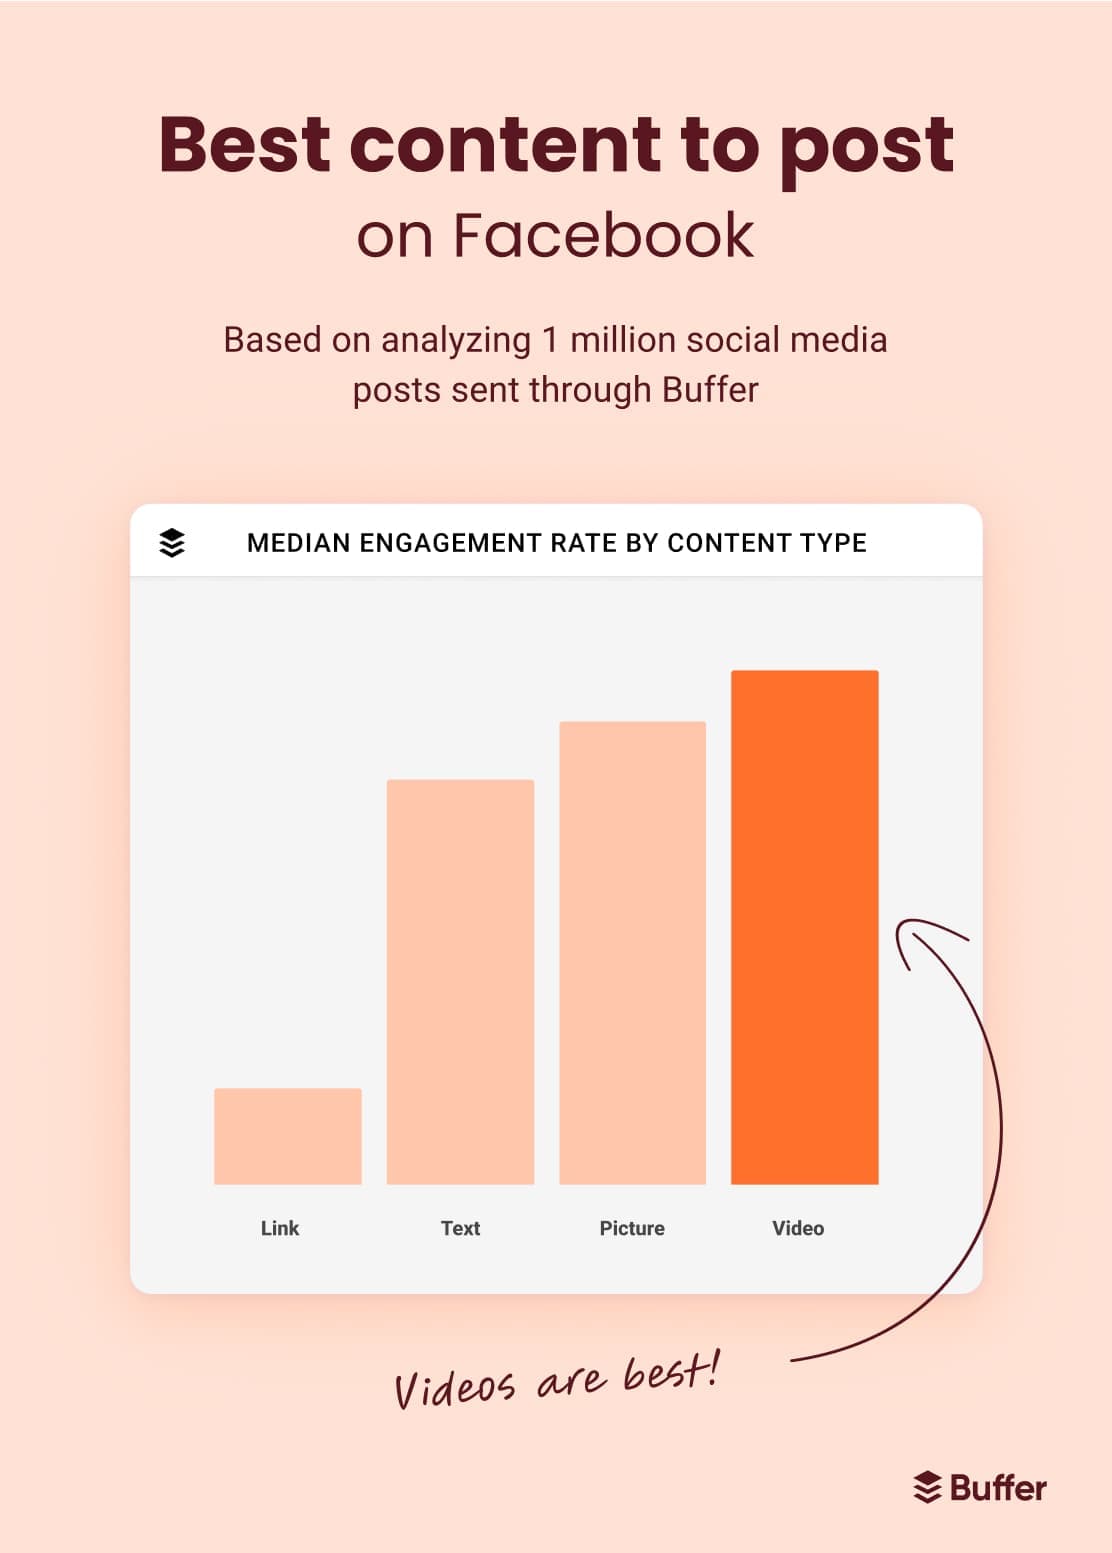 Bar chart comparing median engagement rate by content type displays video as the best content to post on Facebook based on analyzing 1 million social media posts sent through Buffer. Video is followed by picture, text, and link content types.